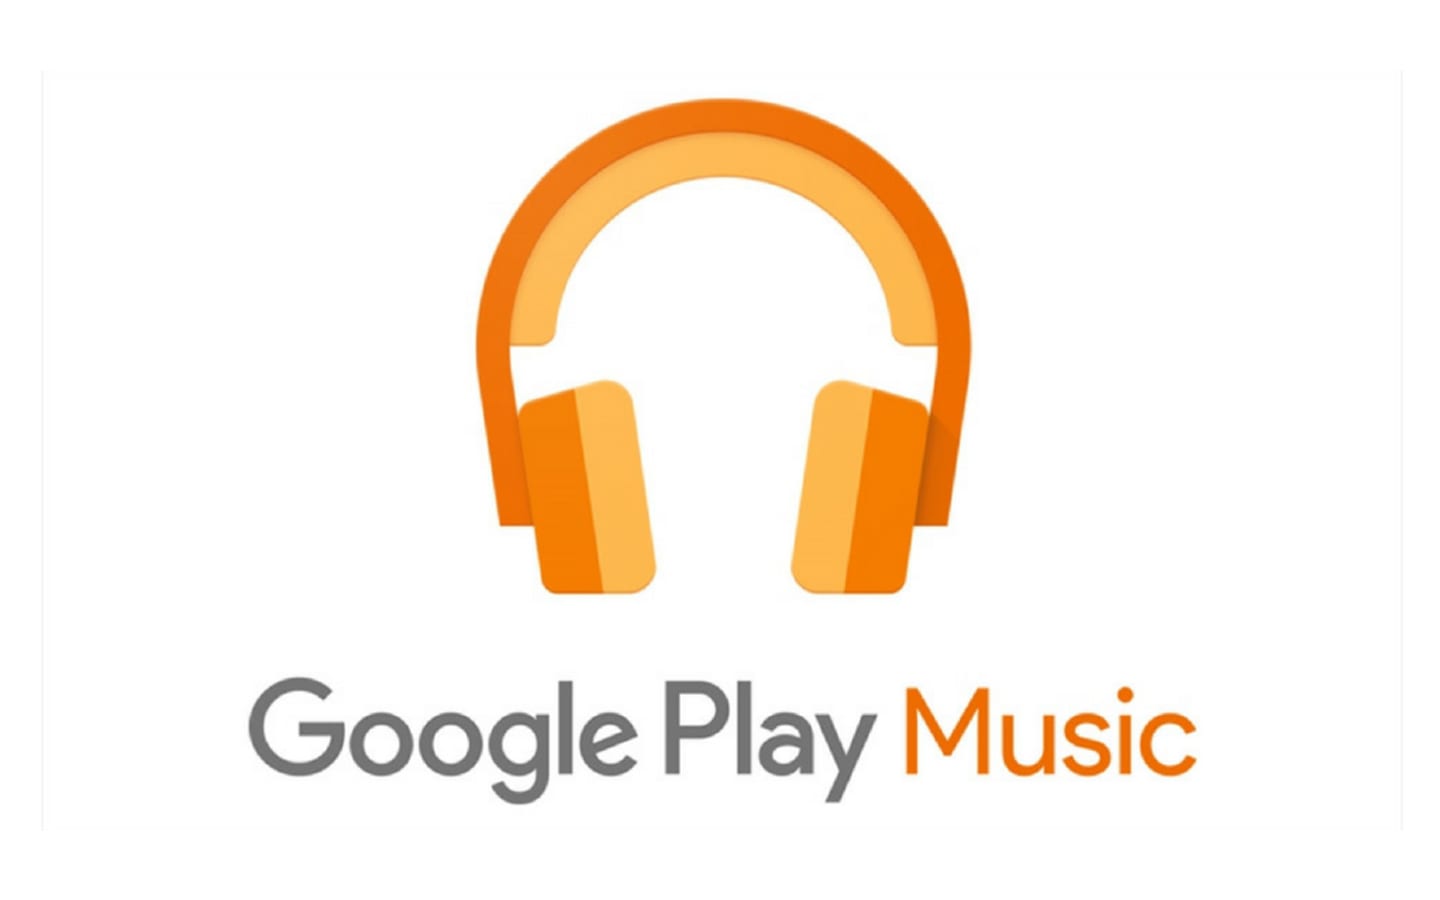 Google Play Music To Stop Streaming From October 2020 - Latest Tech News, Reviews, Tips And Tutorials